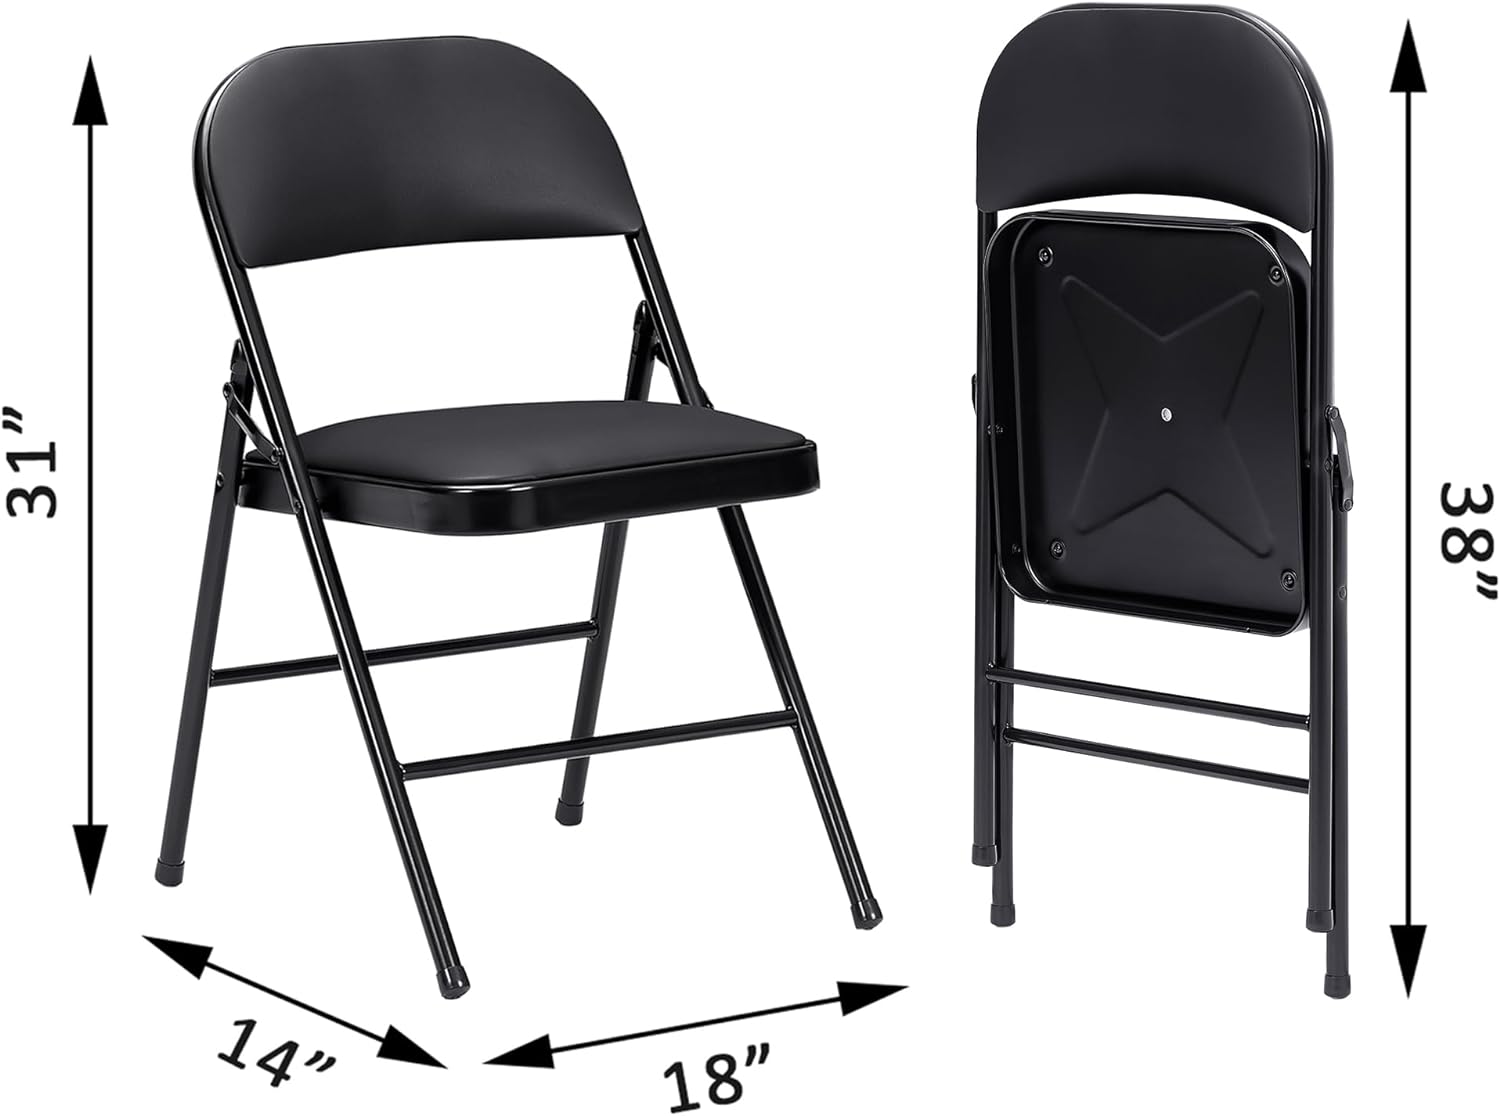 VECELO 4-Pack Folding Chairs Portable Metal with Ultra Soft PU Padded Cushion Seats